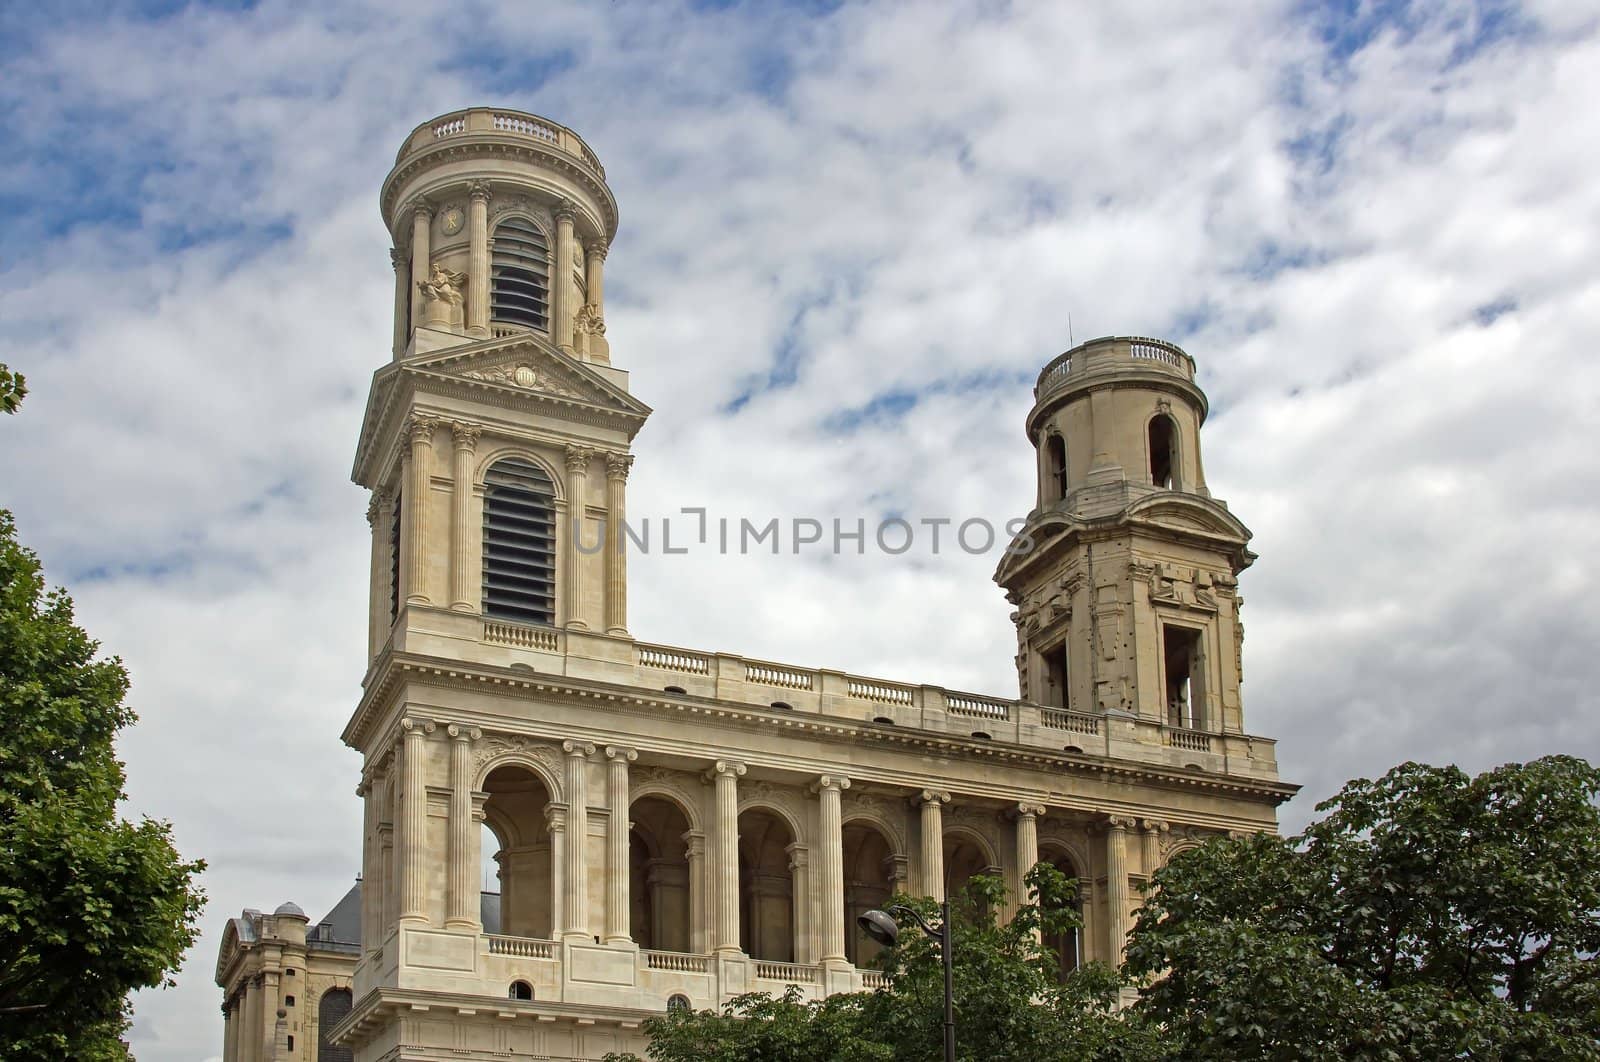 church of St Sulpice in Paris France